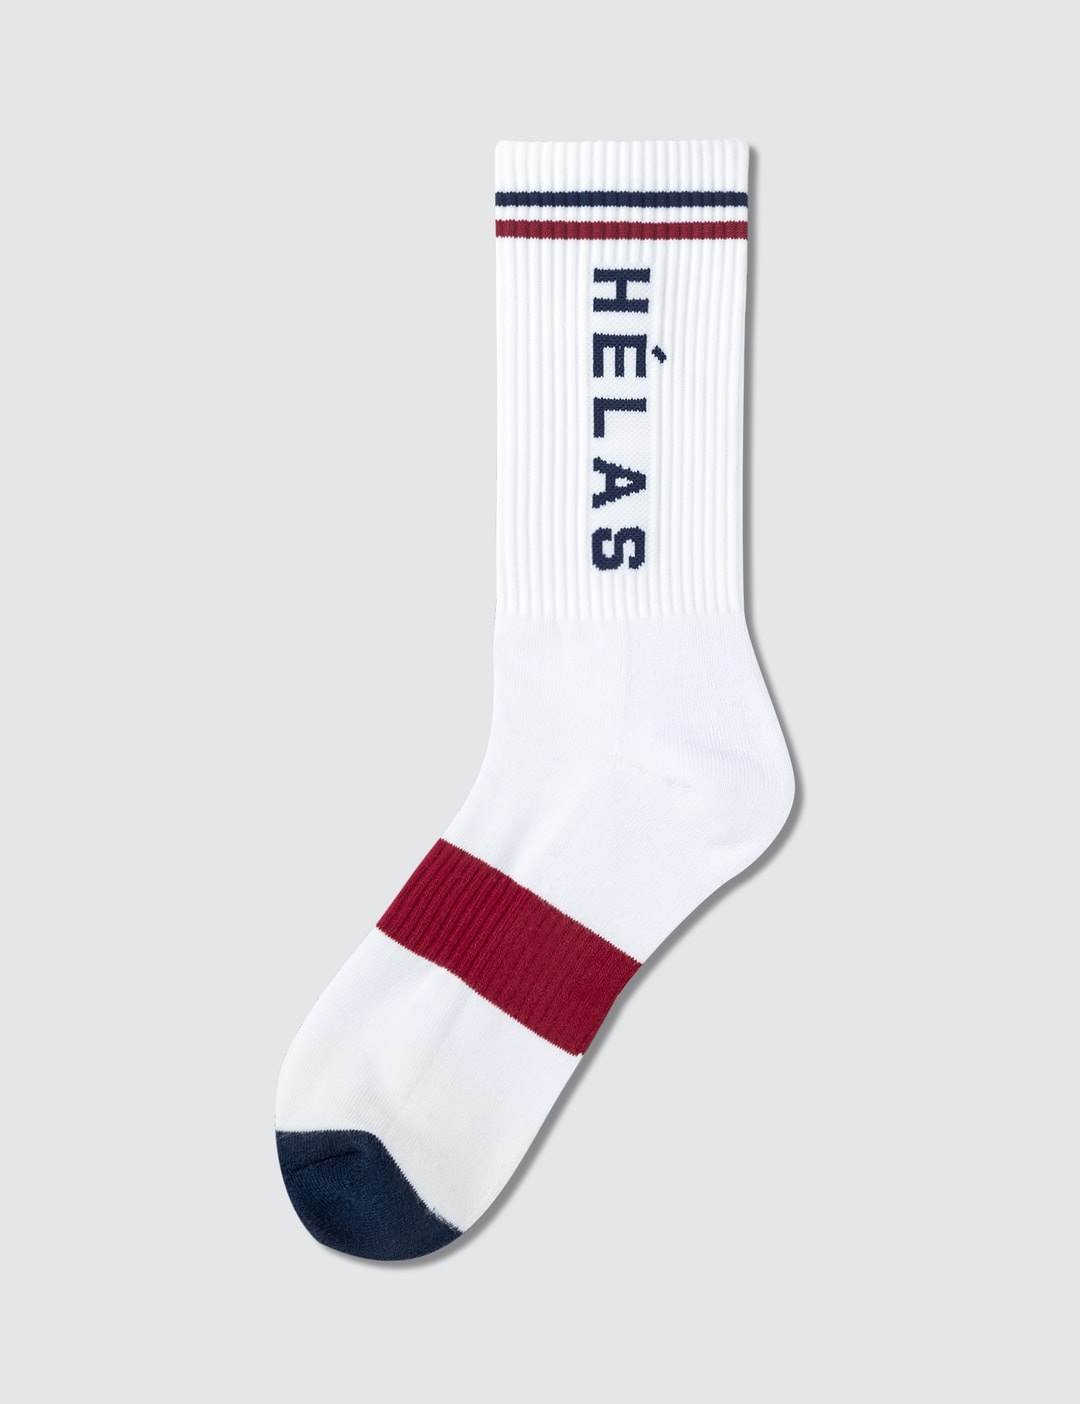 Hélas - Helas Socks | HBX - Globally Curated Fashion and Lifestyle by ...